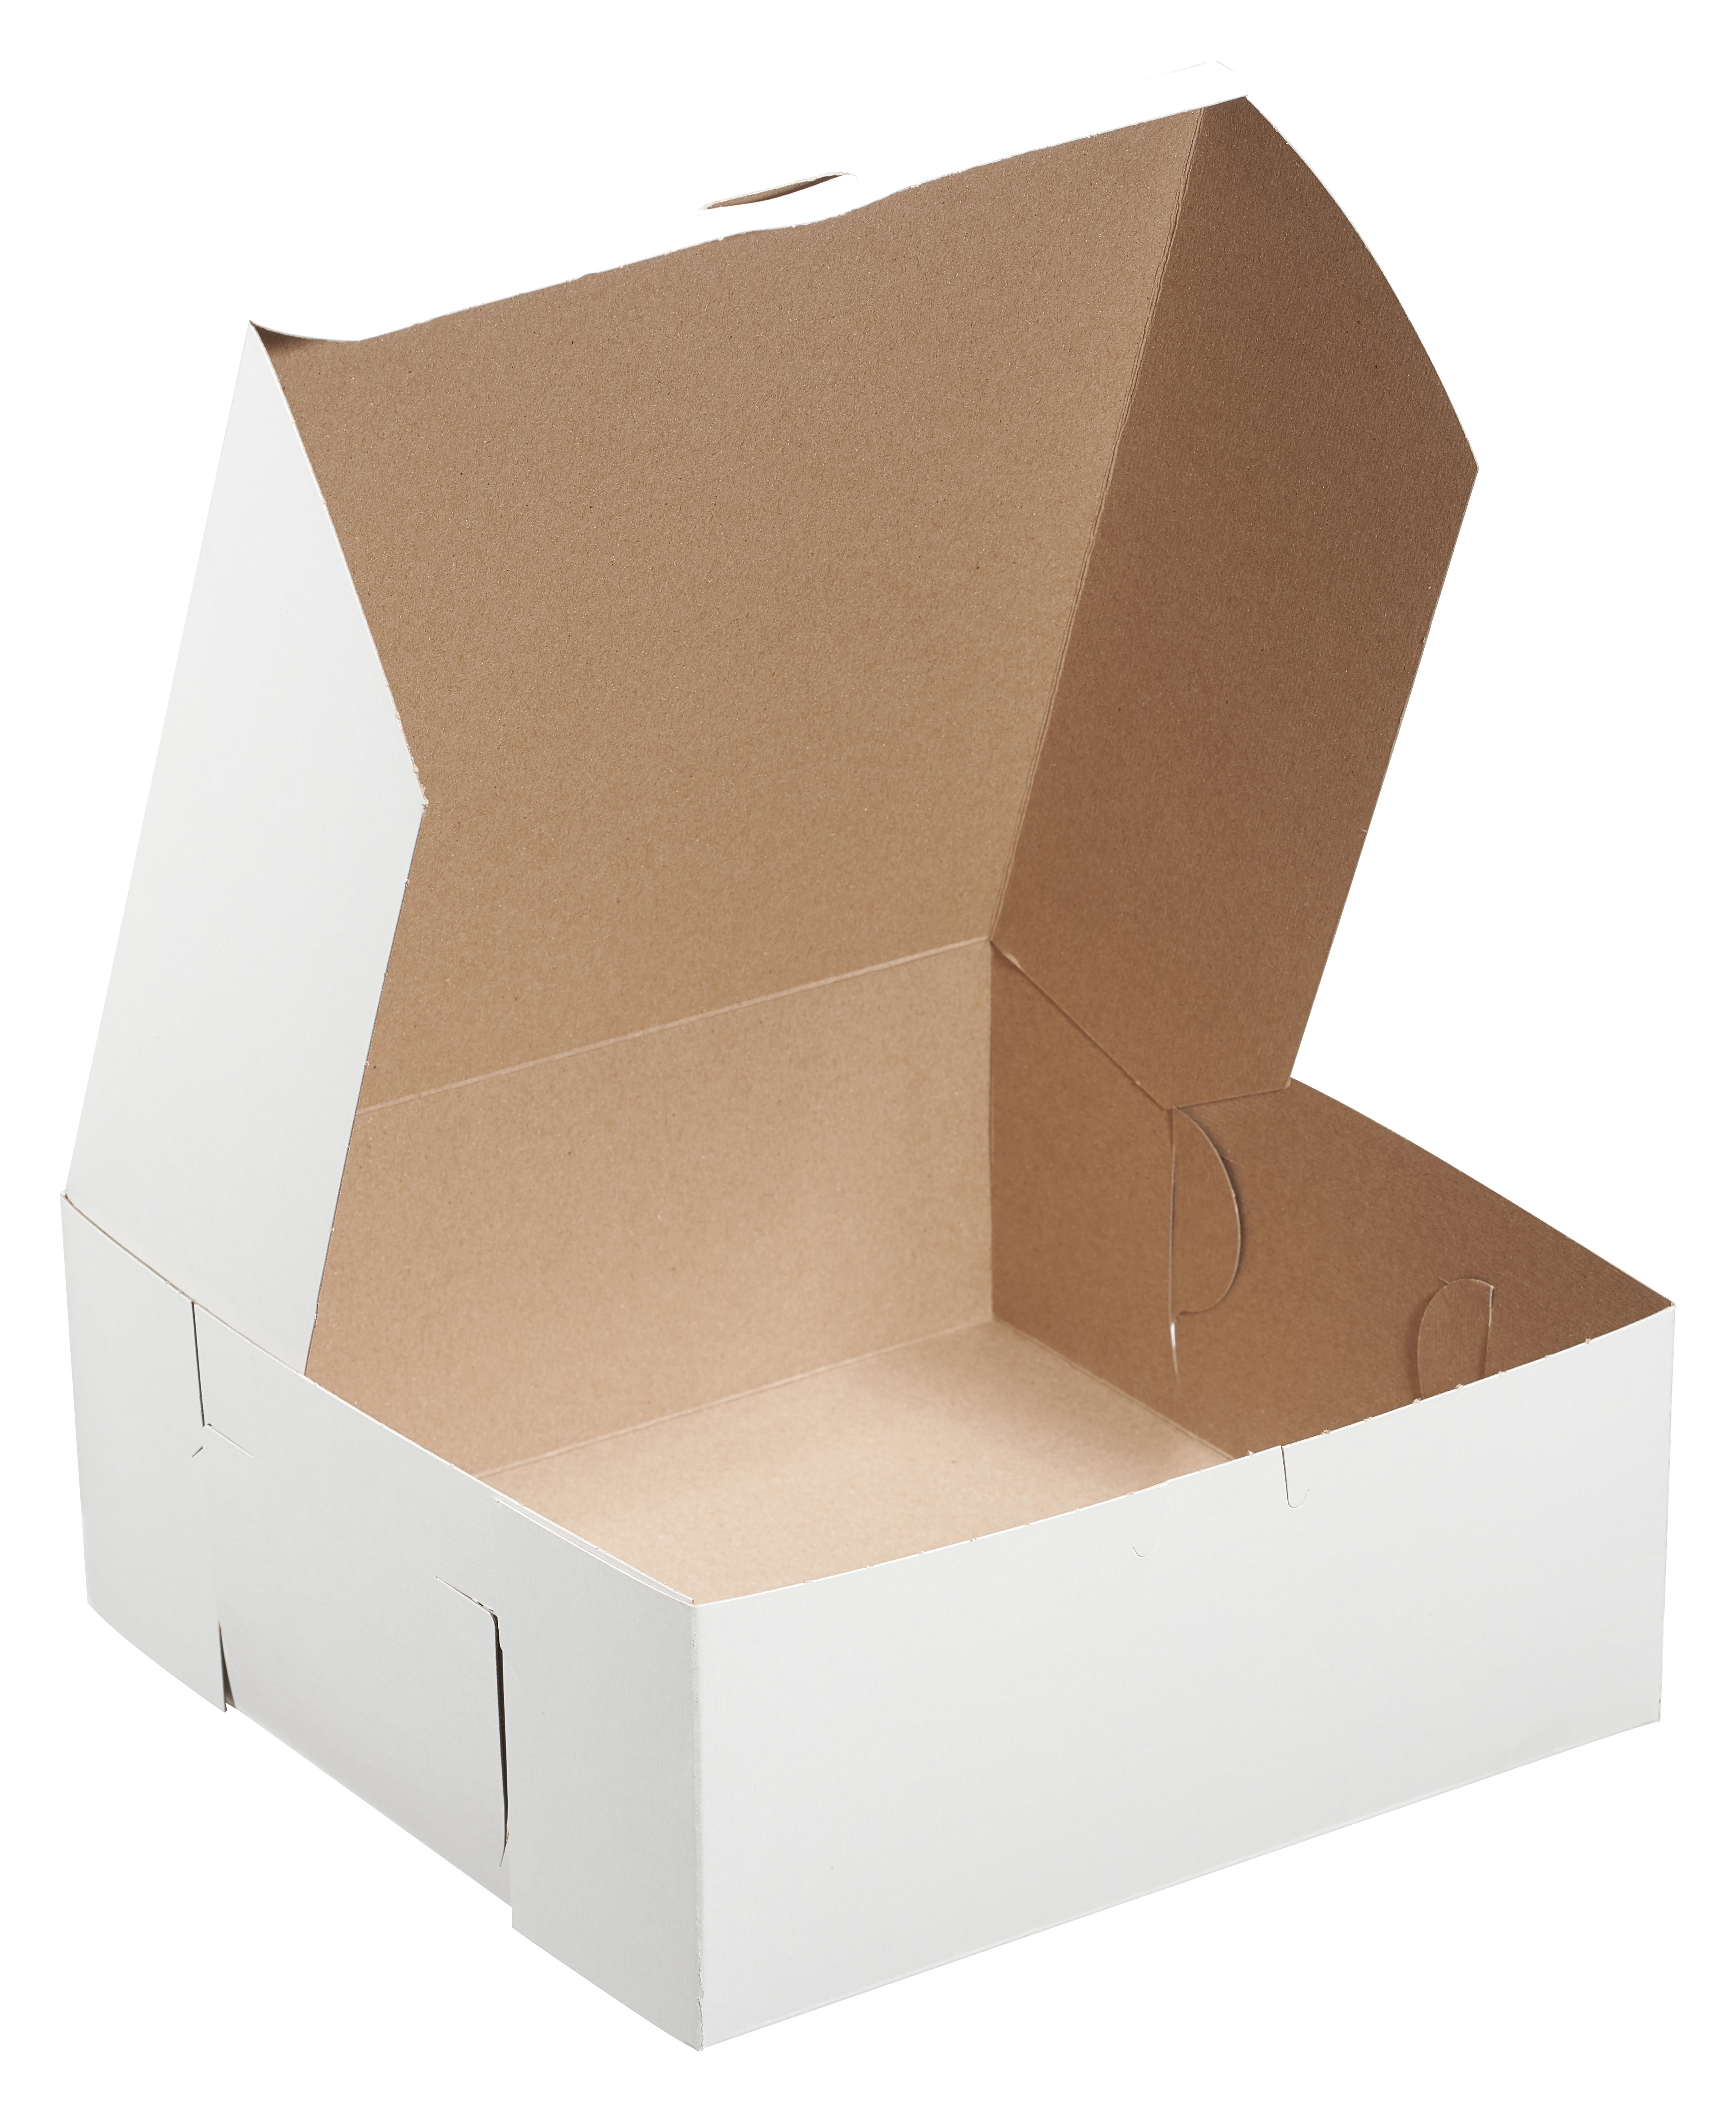 Pack/10 Light Weight White Self-Folding Kraft Boxes SZ Inches 8.5 x 2.75 x 2.75